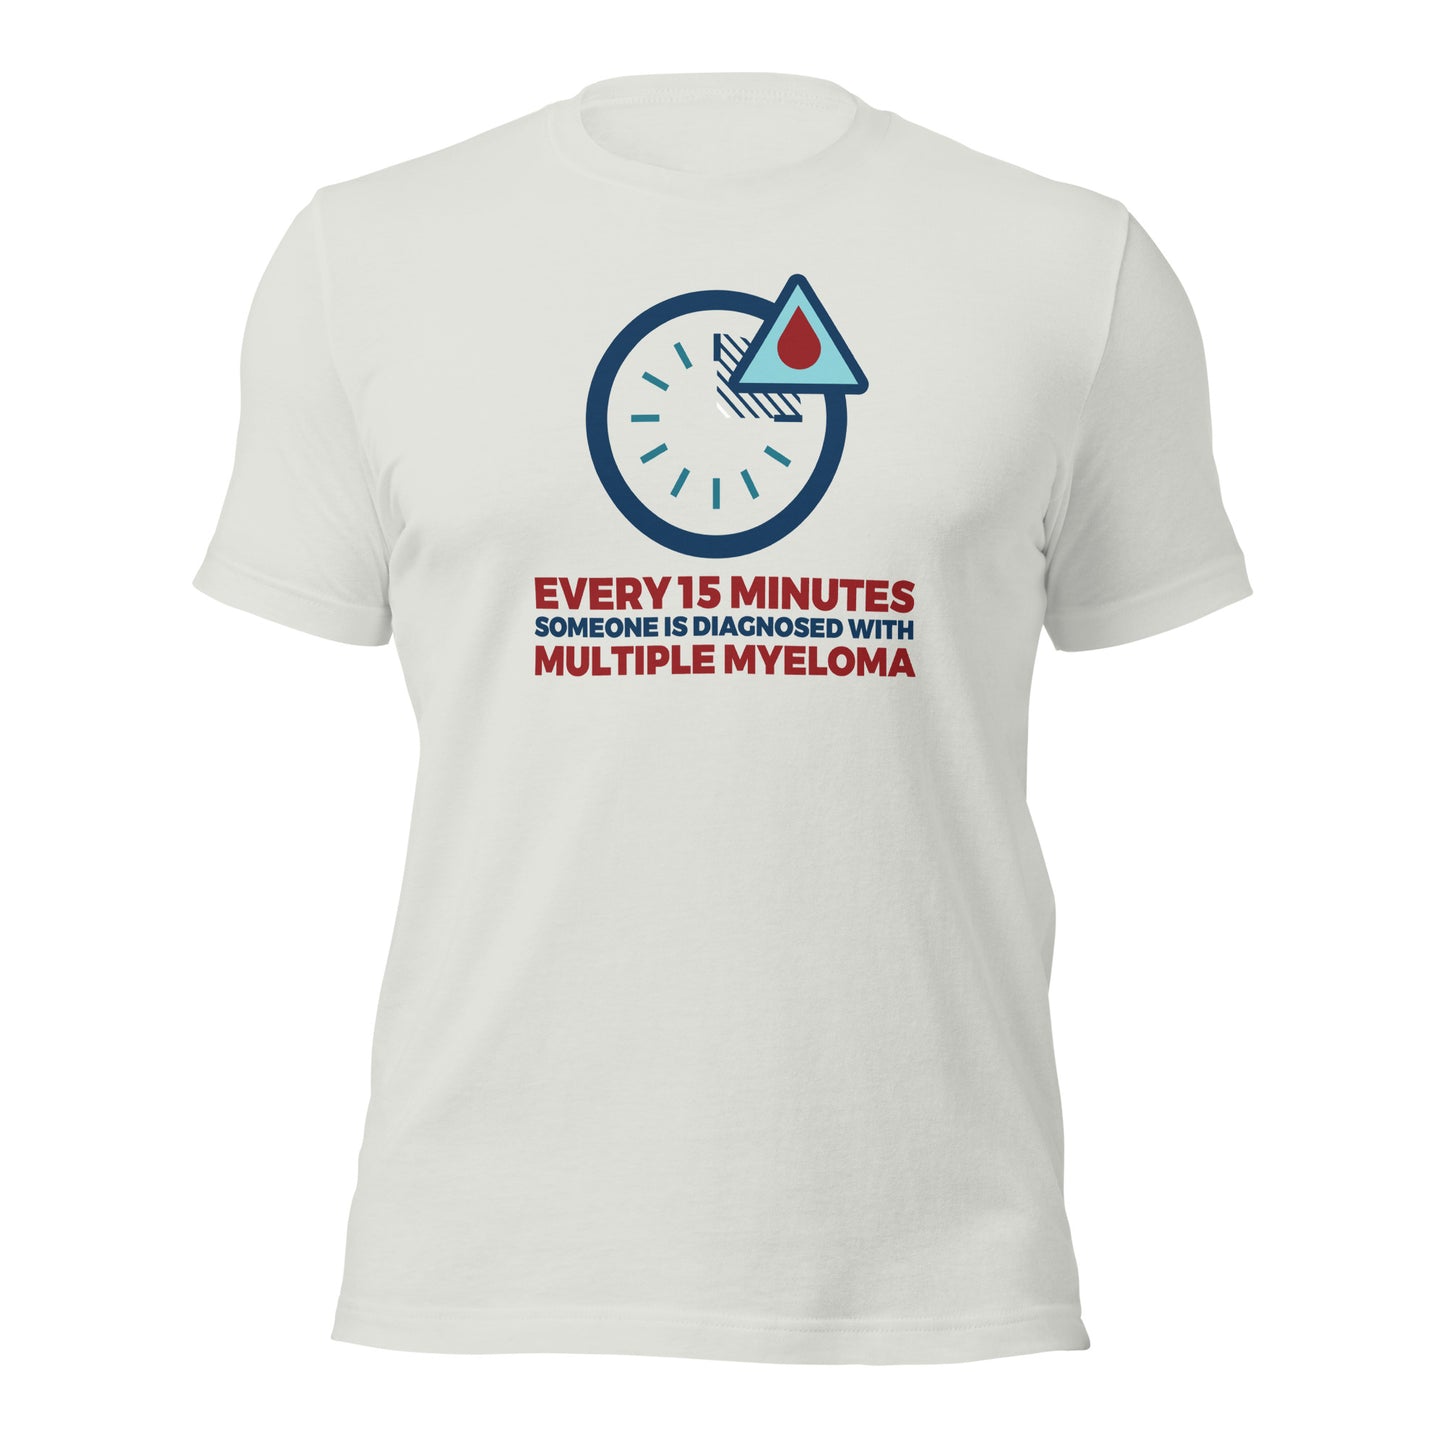 "Every 15 Minutes" Unisex t-shirt in white